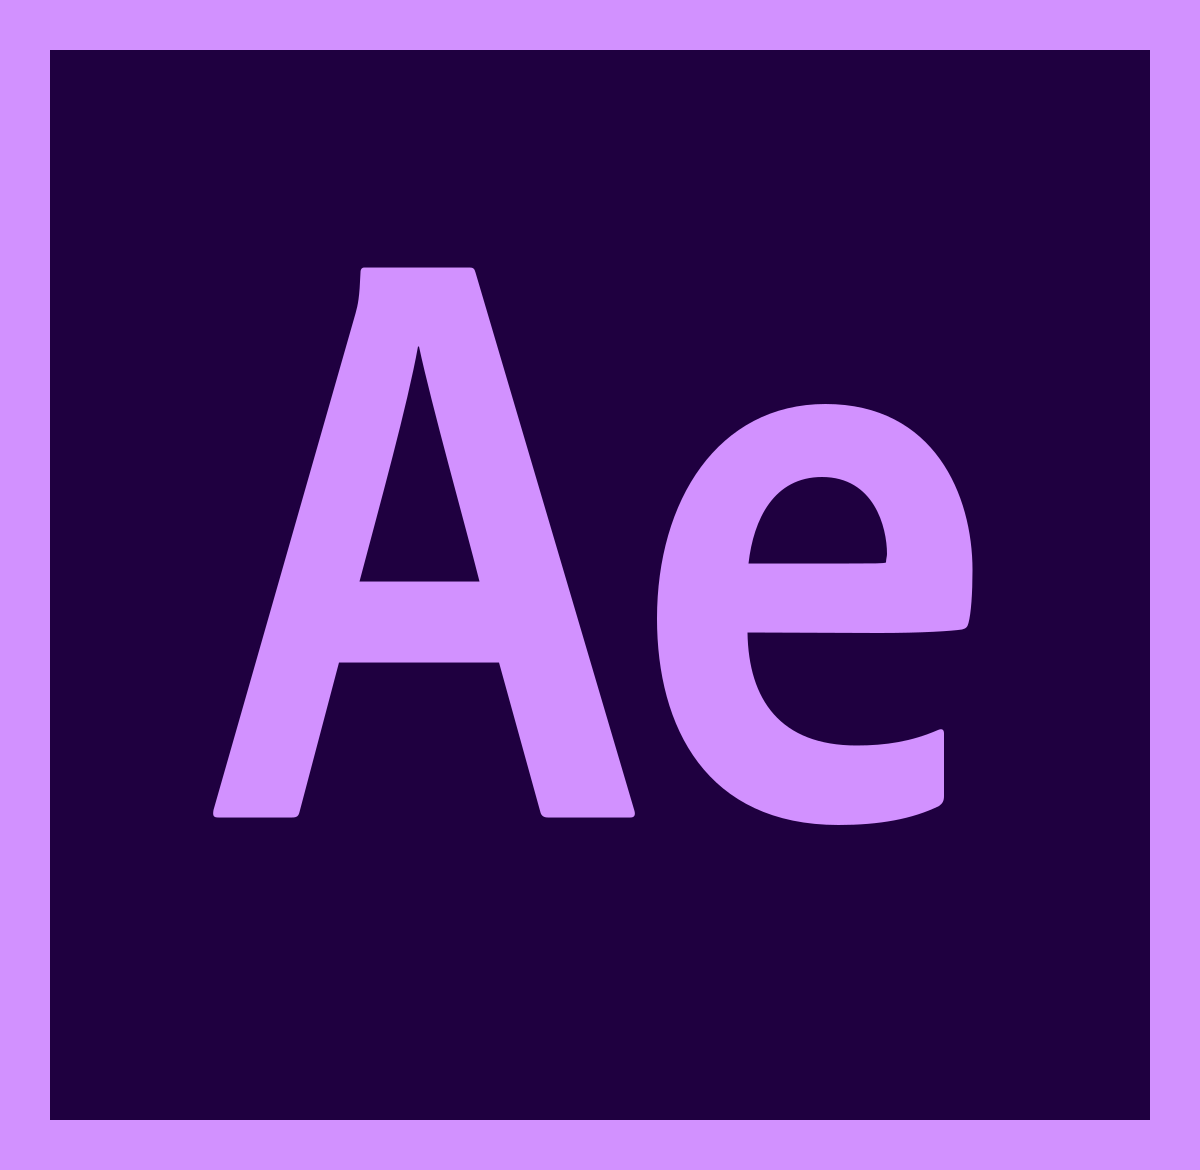 1200px-Adobe_After_Effects_CC_icon.svg